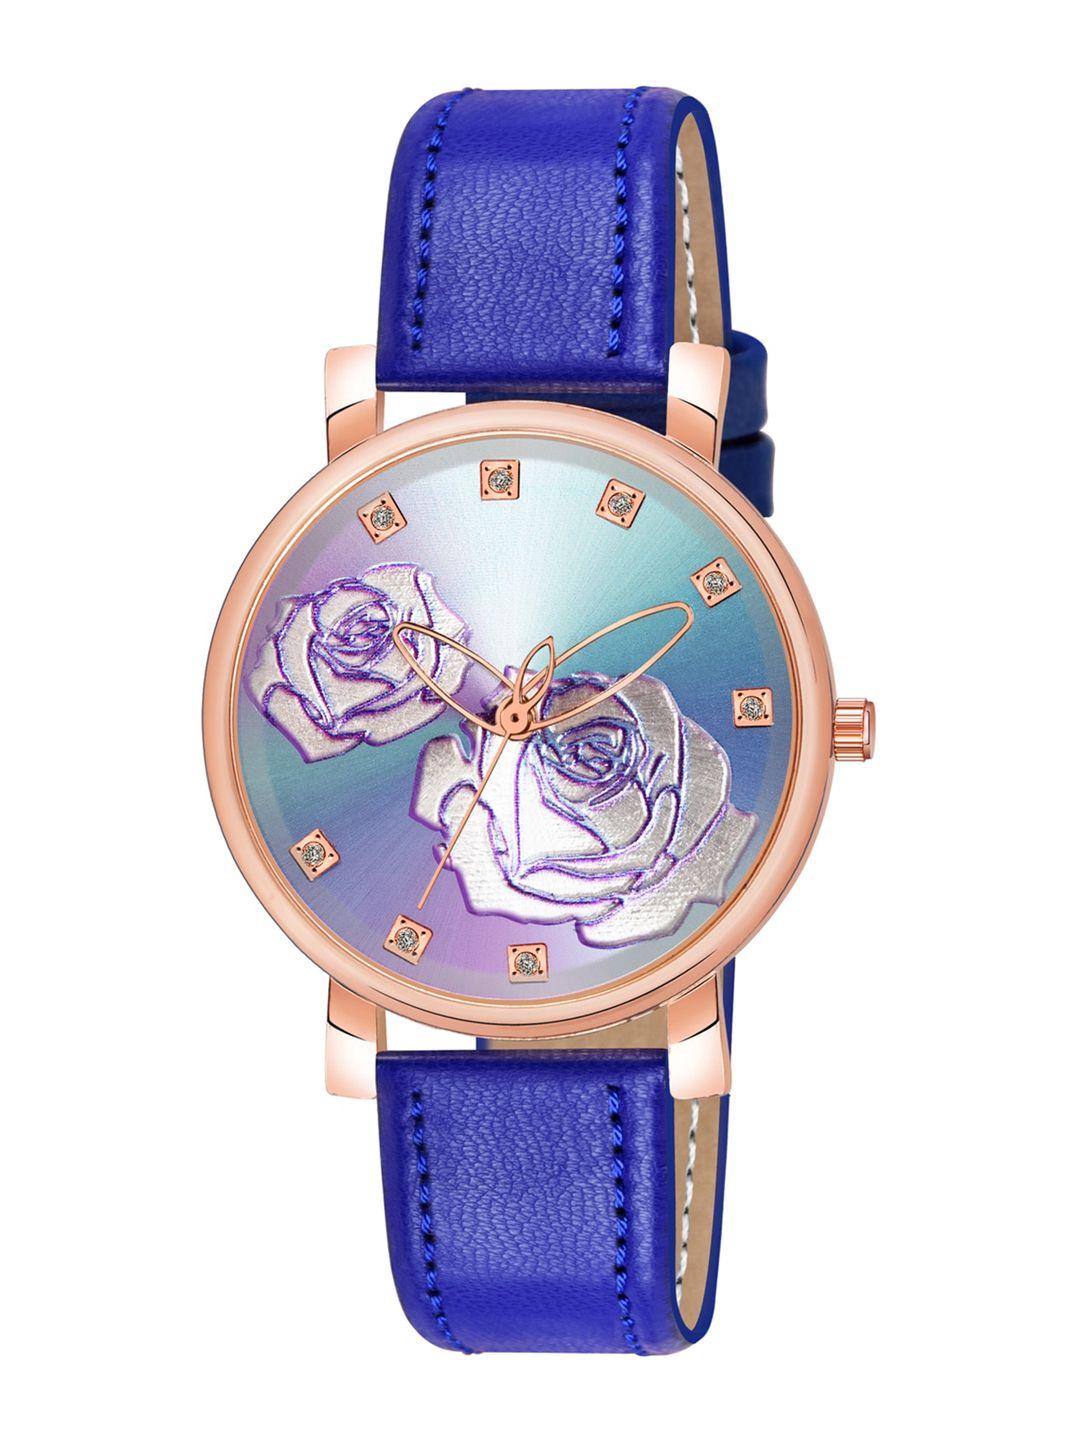 wuxi women brass embellished dial & leather straps analogue watch m-875 blue